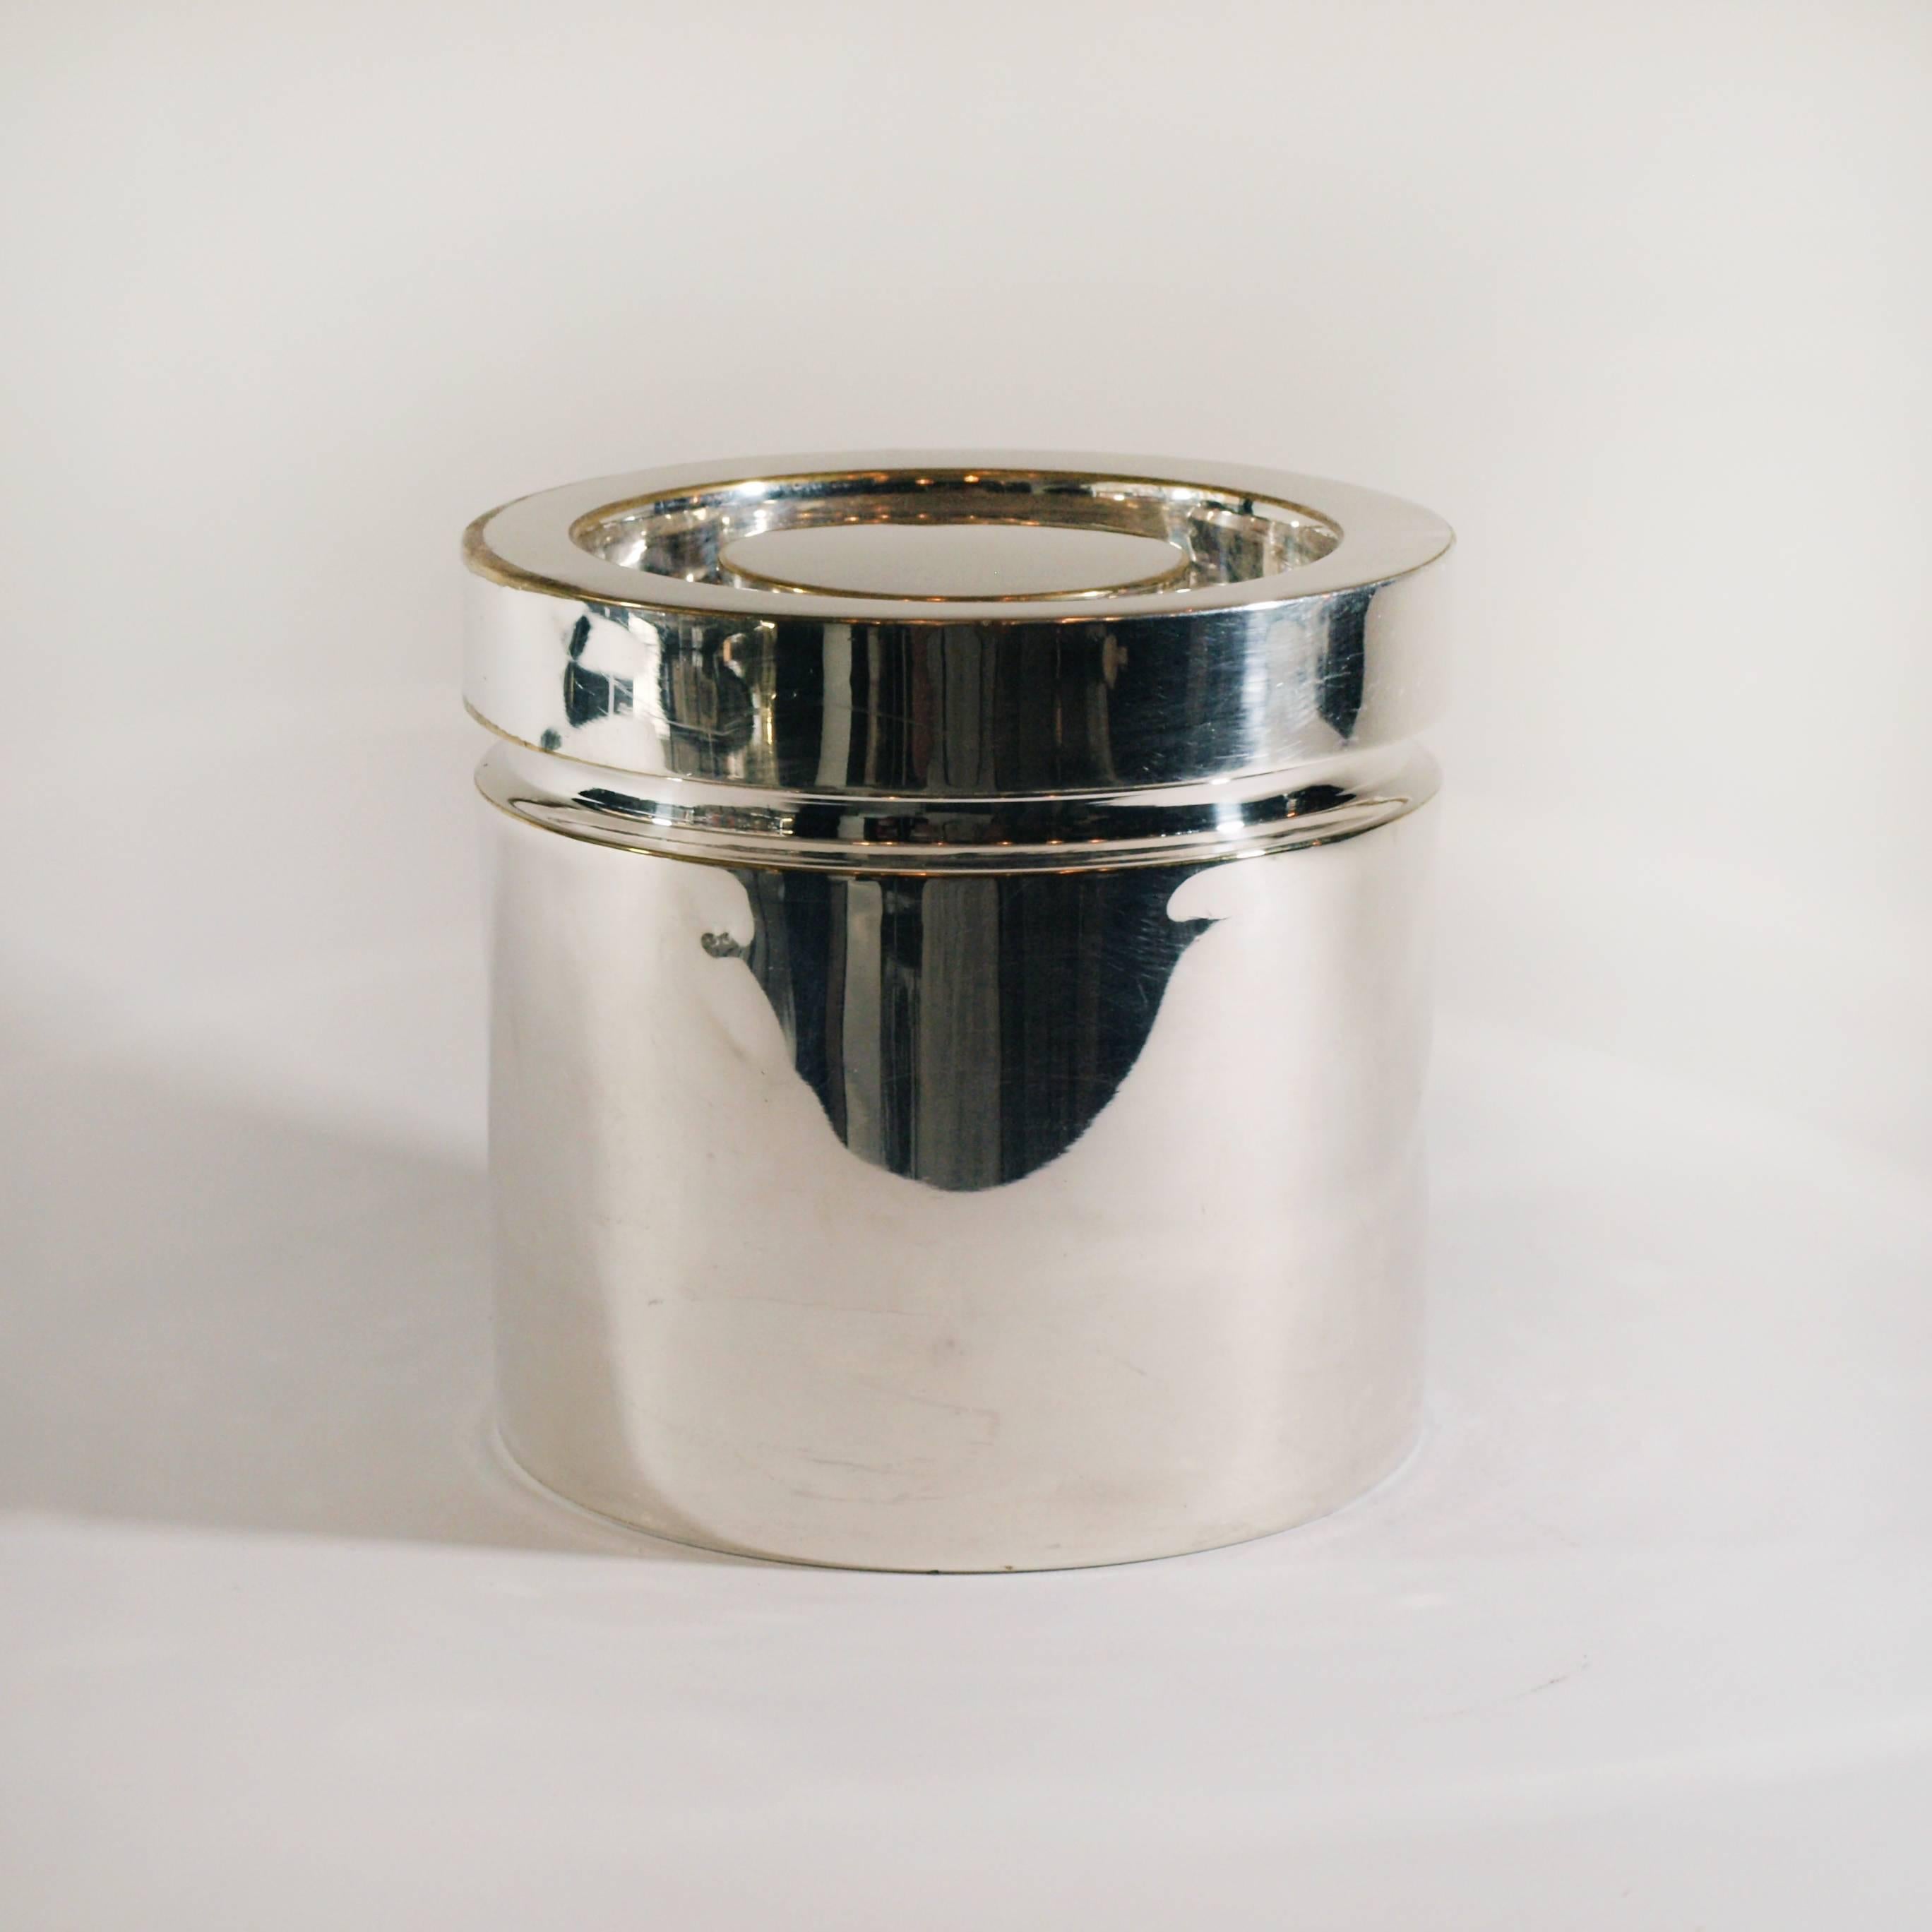 A silver plated ice bucket with lid designed by Gio Ponti for Sabattini of Italy. Copper and glass lined interior. Stamped Sabattini, made in Italy to underside.
Measures: H 16cm W.
Italian, circa 1975.
       